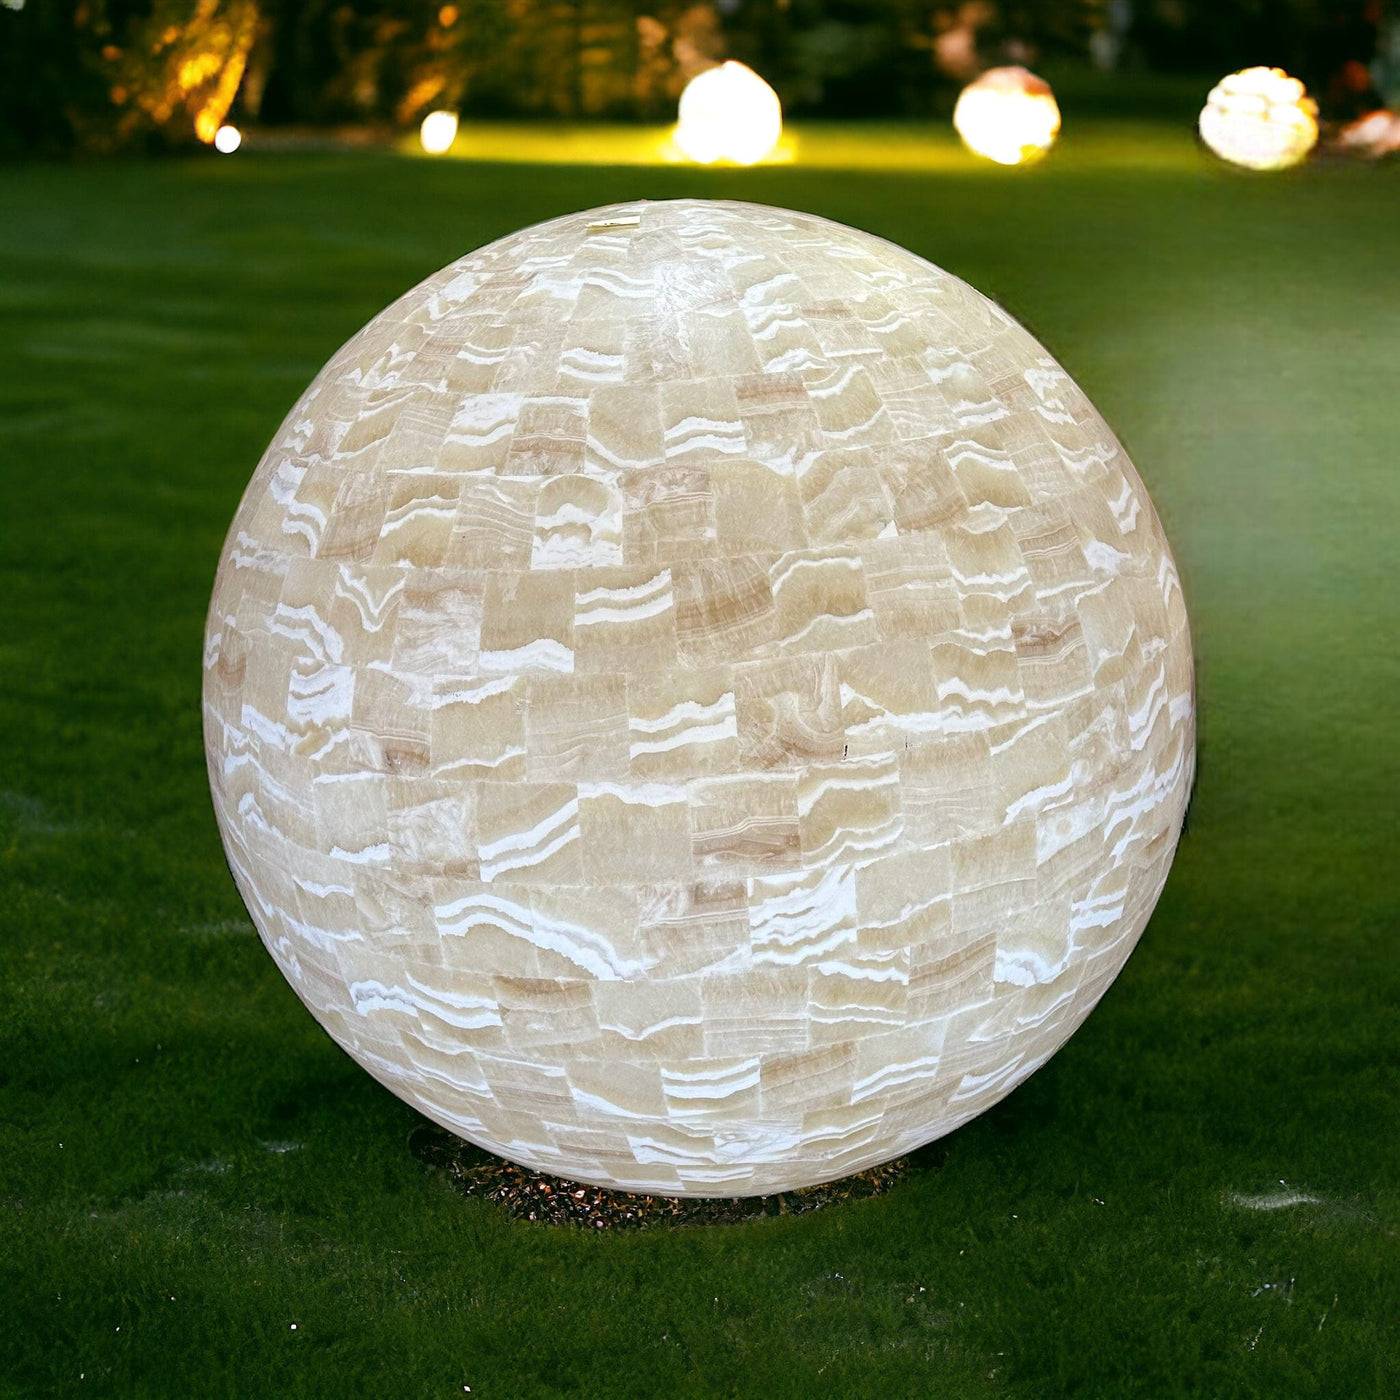 lamp can be displayed in yard or indoors